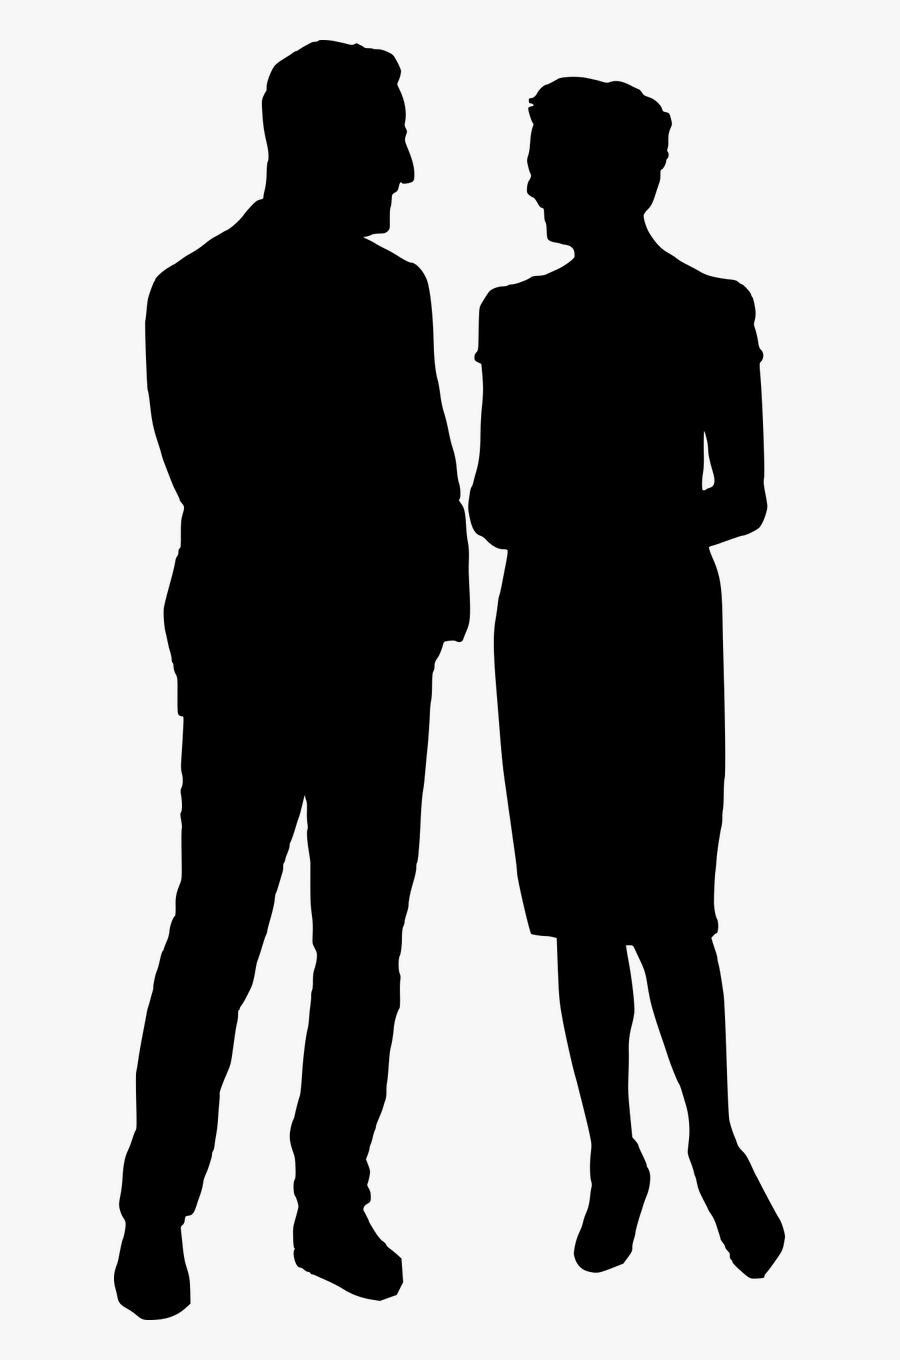 Discussion People Talking Free Picture - Silhouette People Talking Png, Transparent Clipart